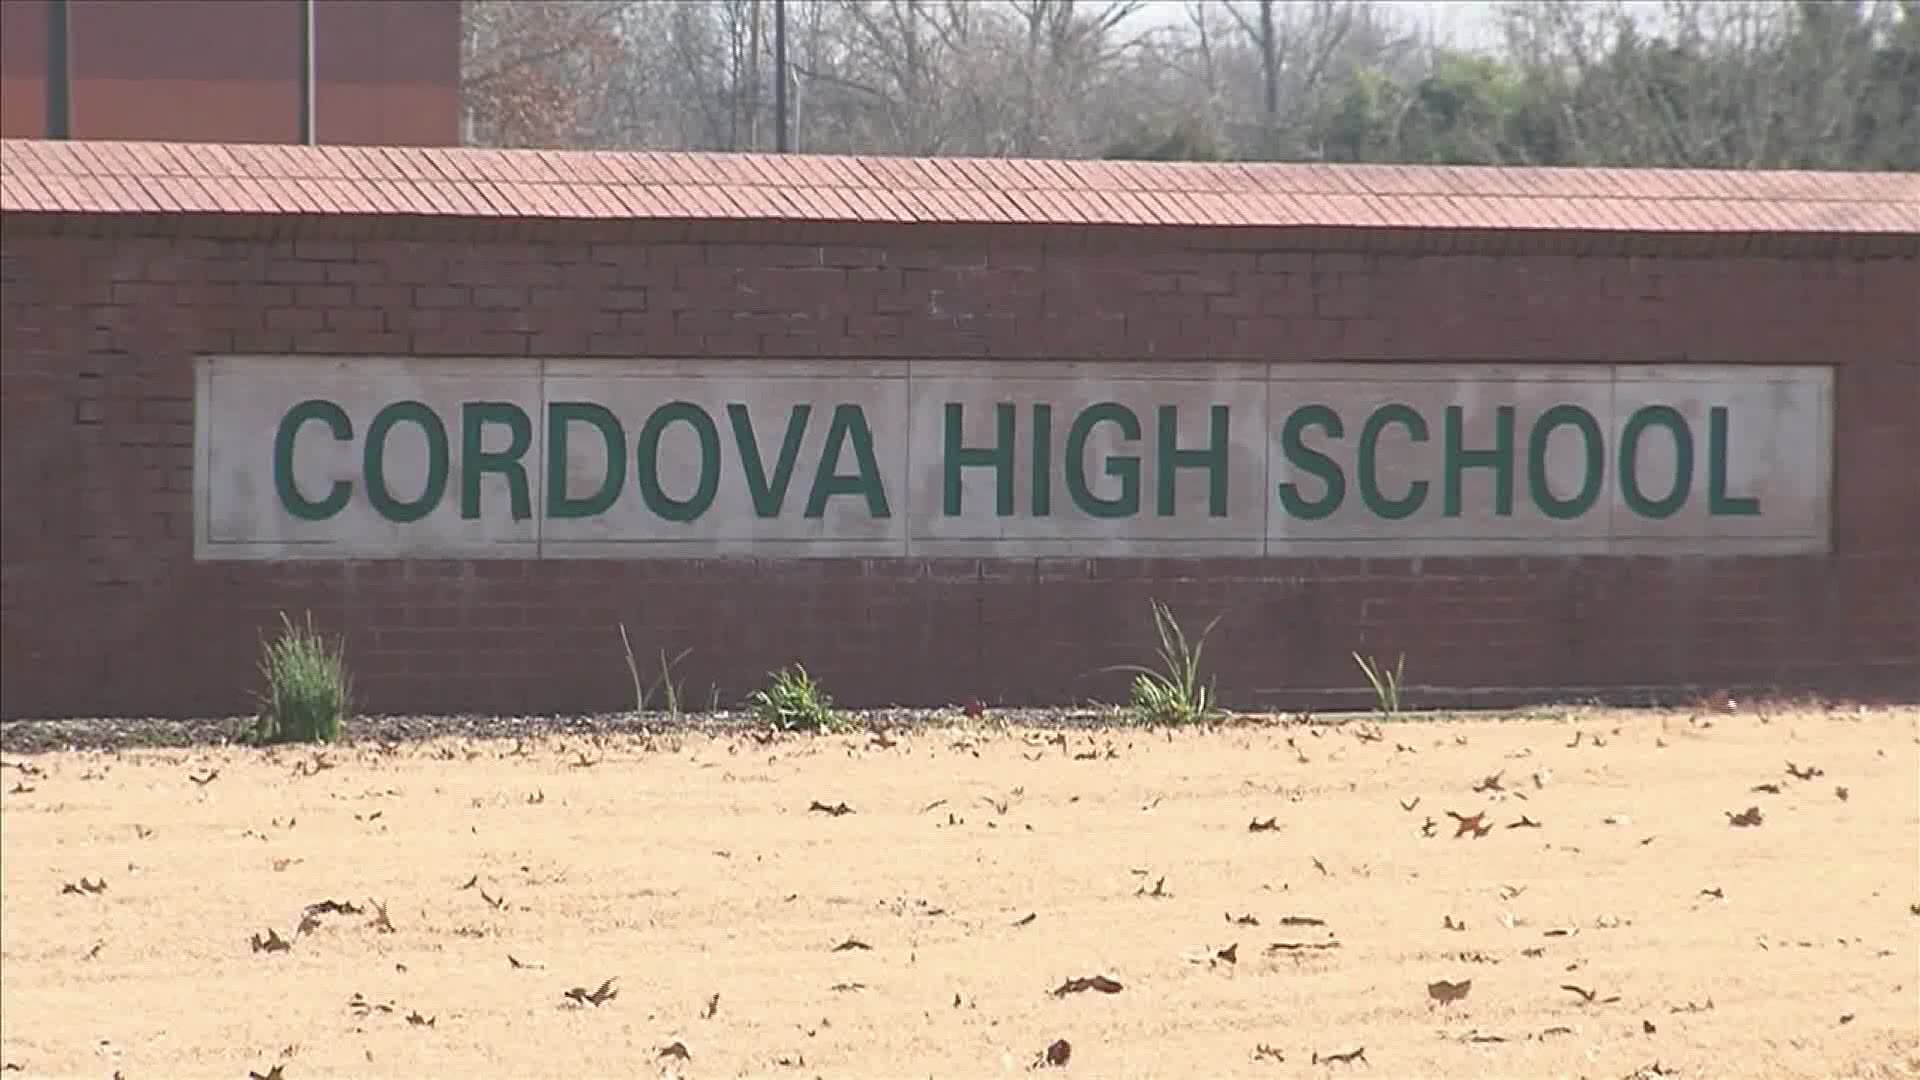 The panel discusses the Cordova High School principal on how he tells his students about the censoring of social media accounts amounts to mccarthyism.